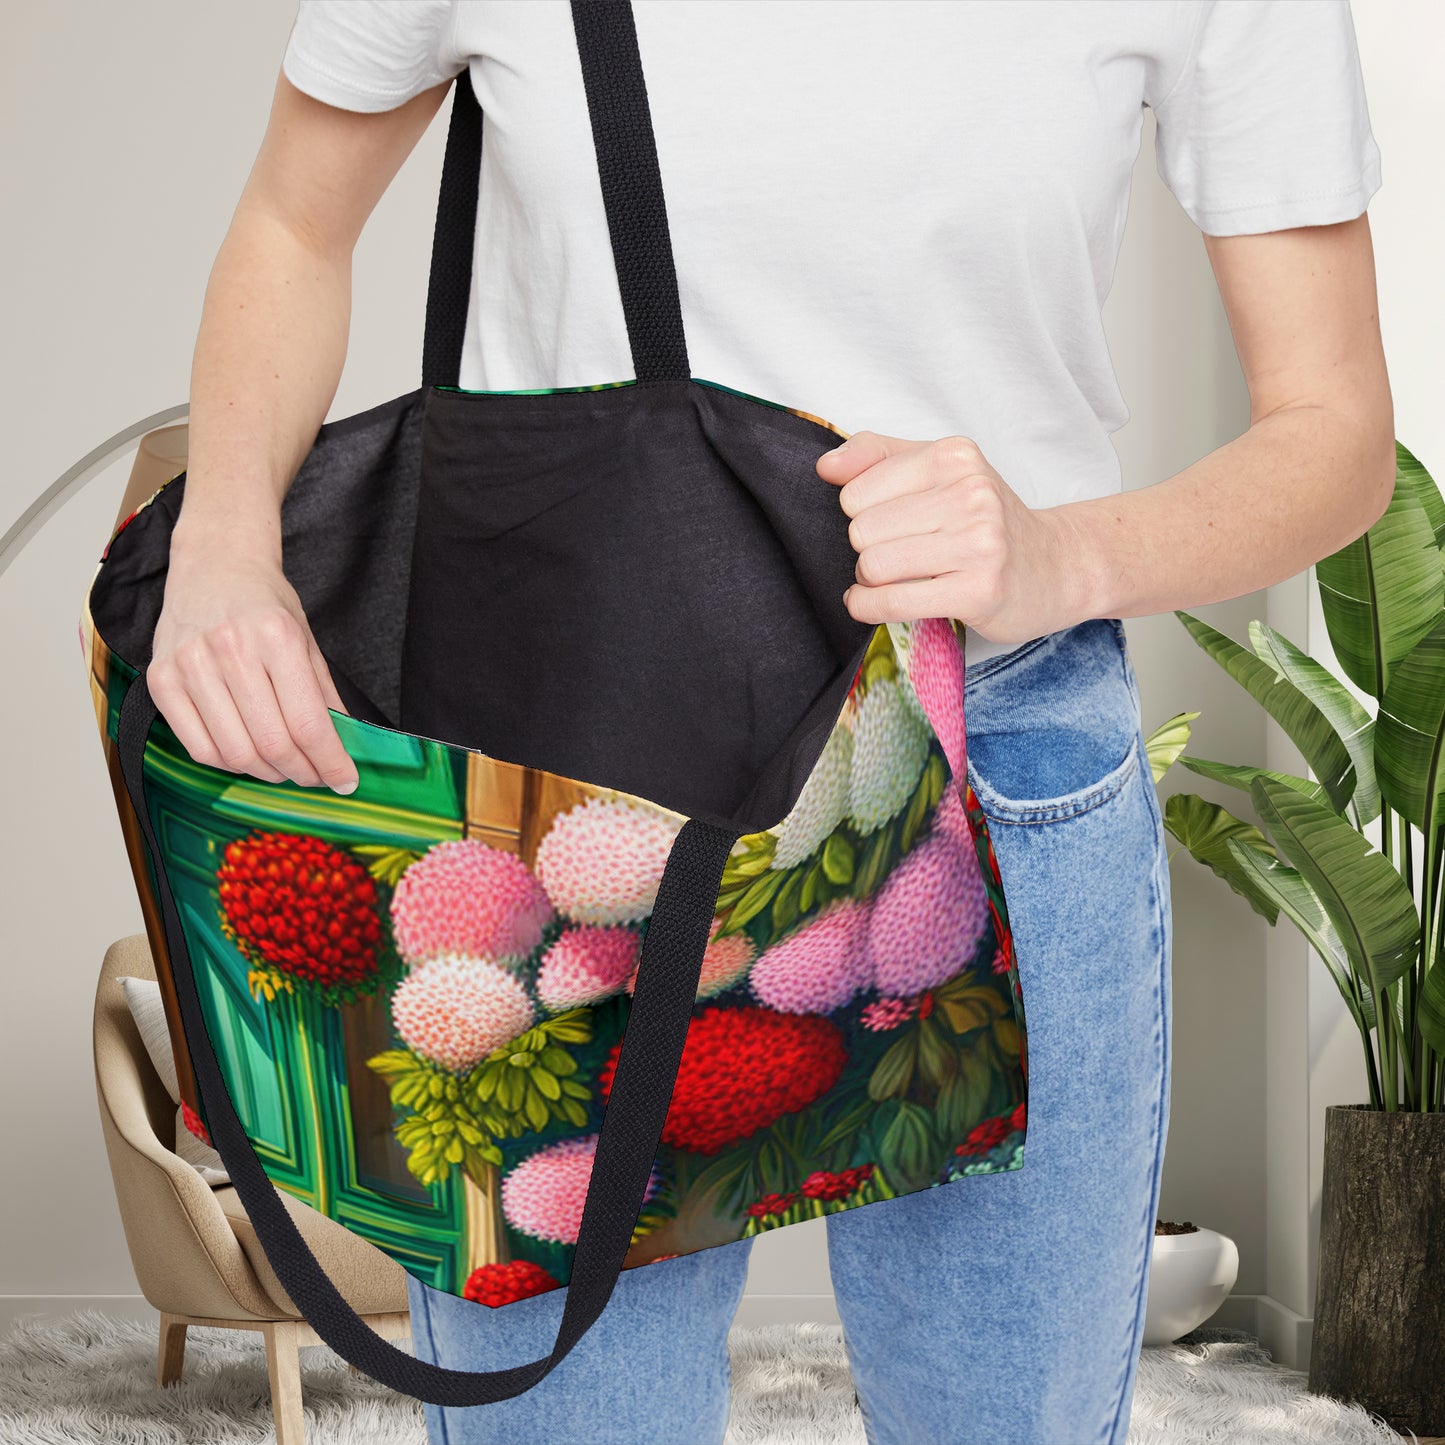 Giant flowers on this beautiful Weekender Tote Bag. Sometimes bigger can be better.